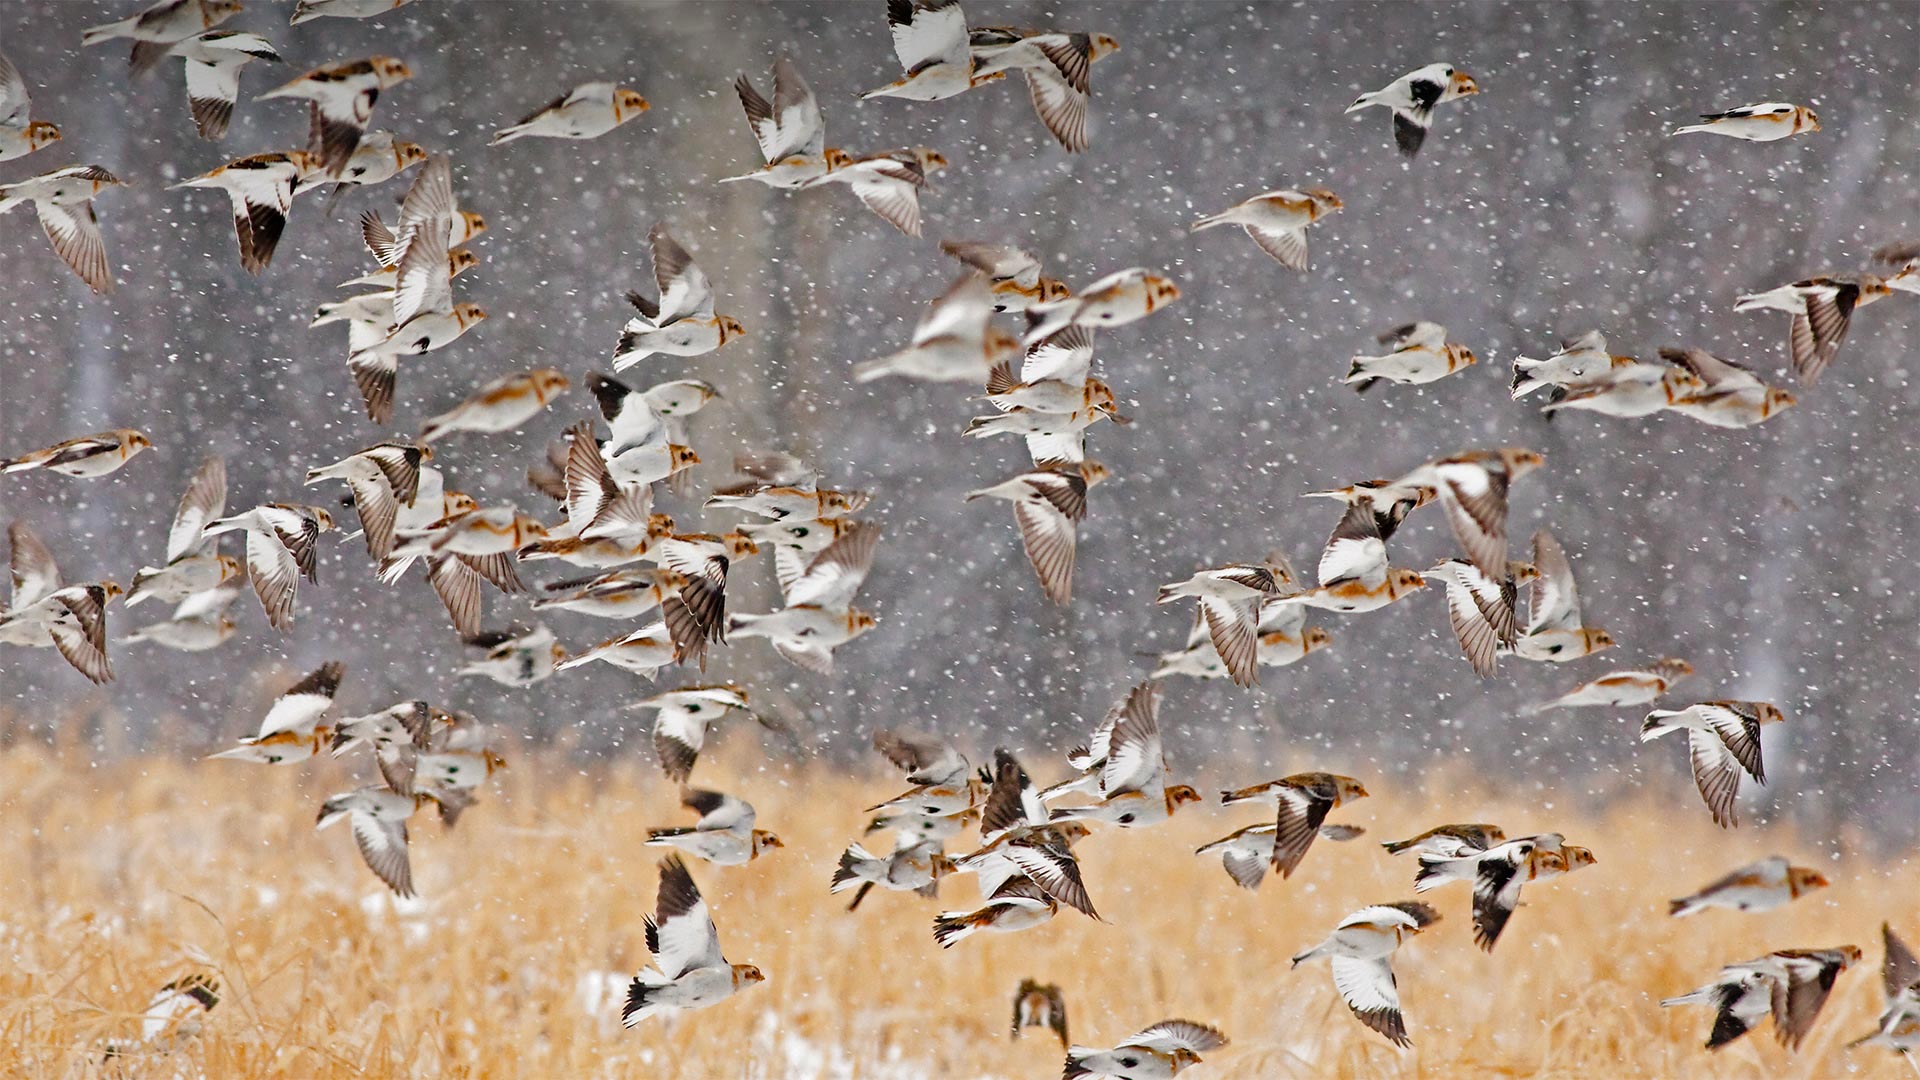 Snow buntings flock during a snowstorm in New York - Marie Read